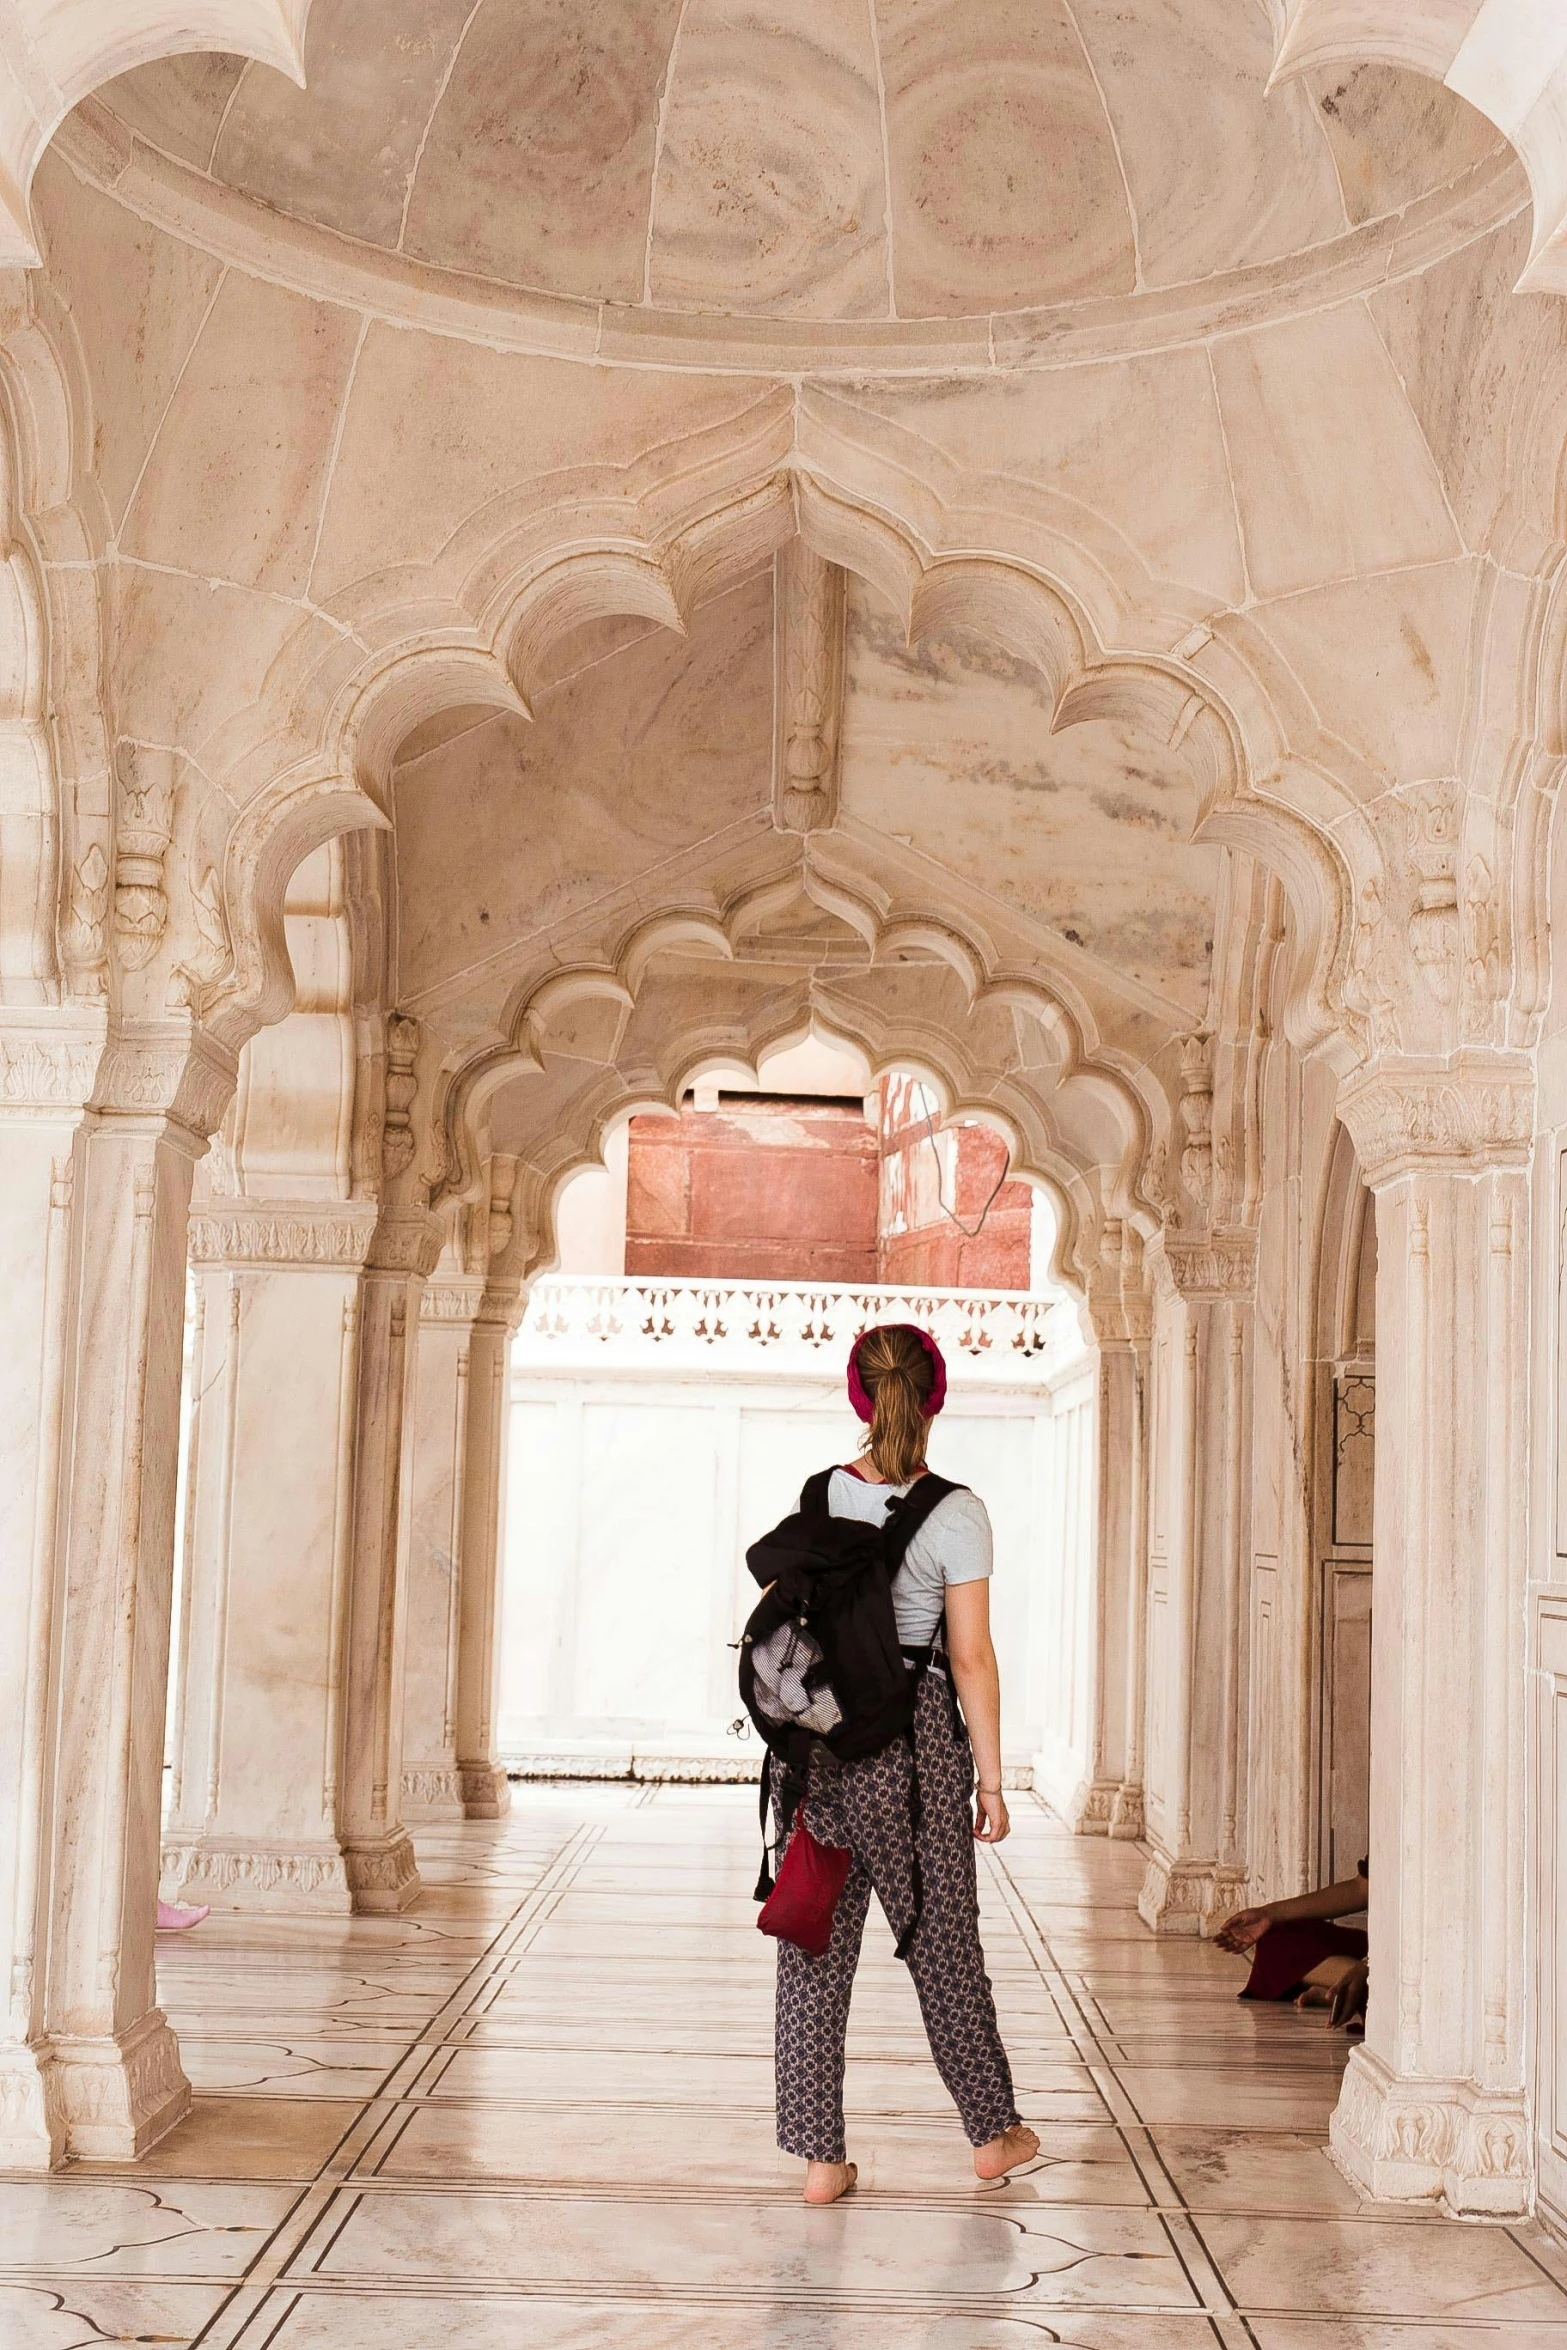 a woman with a backpack standing in a building, a marble sculpture, inspired by Steve McCurry, arabesque, white stone arches, taj mahal, maroon and white, m